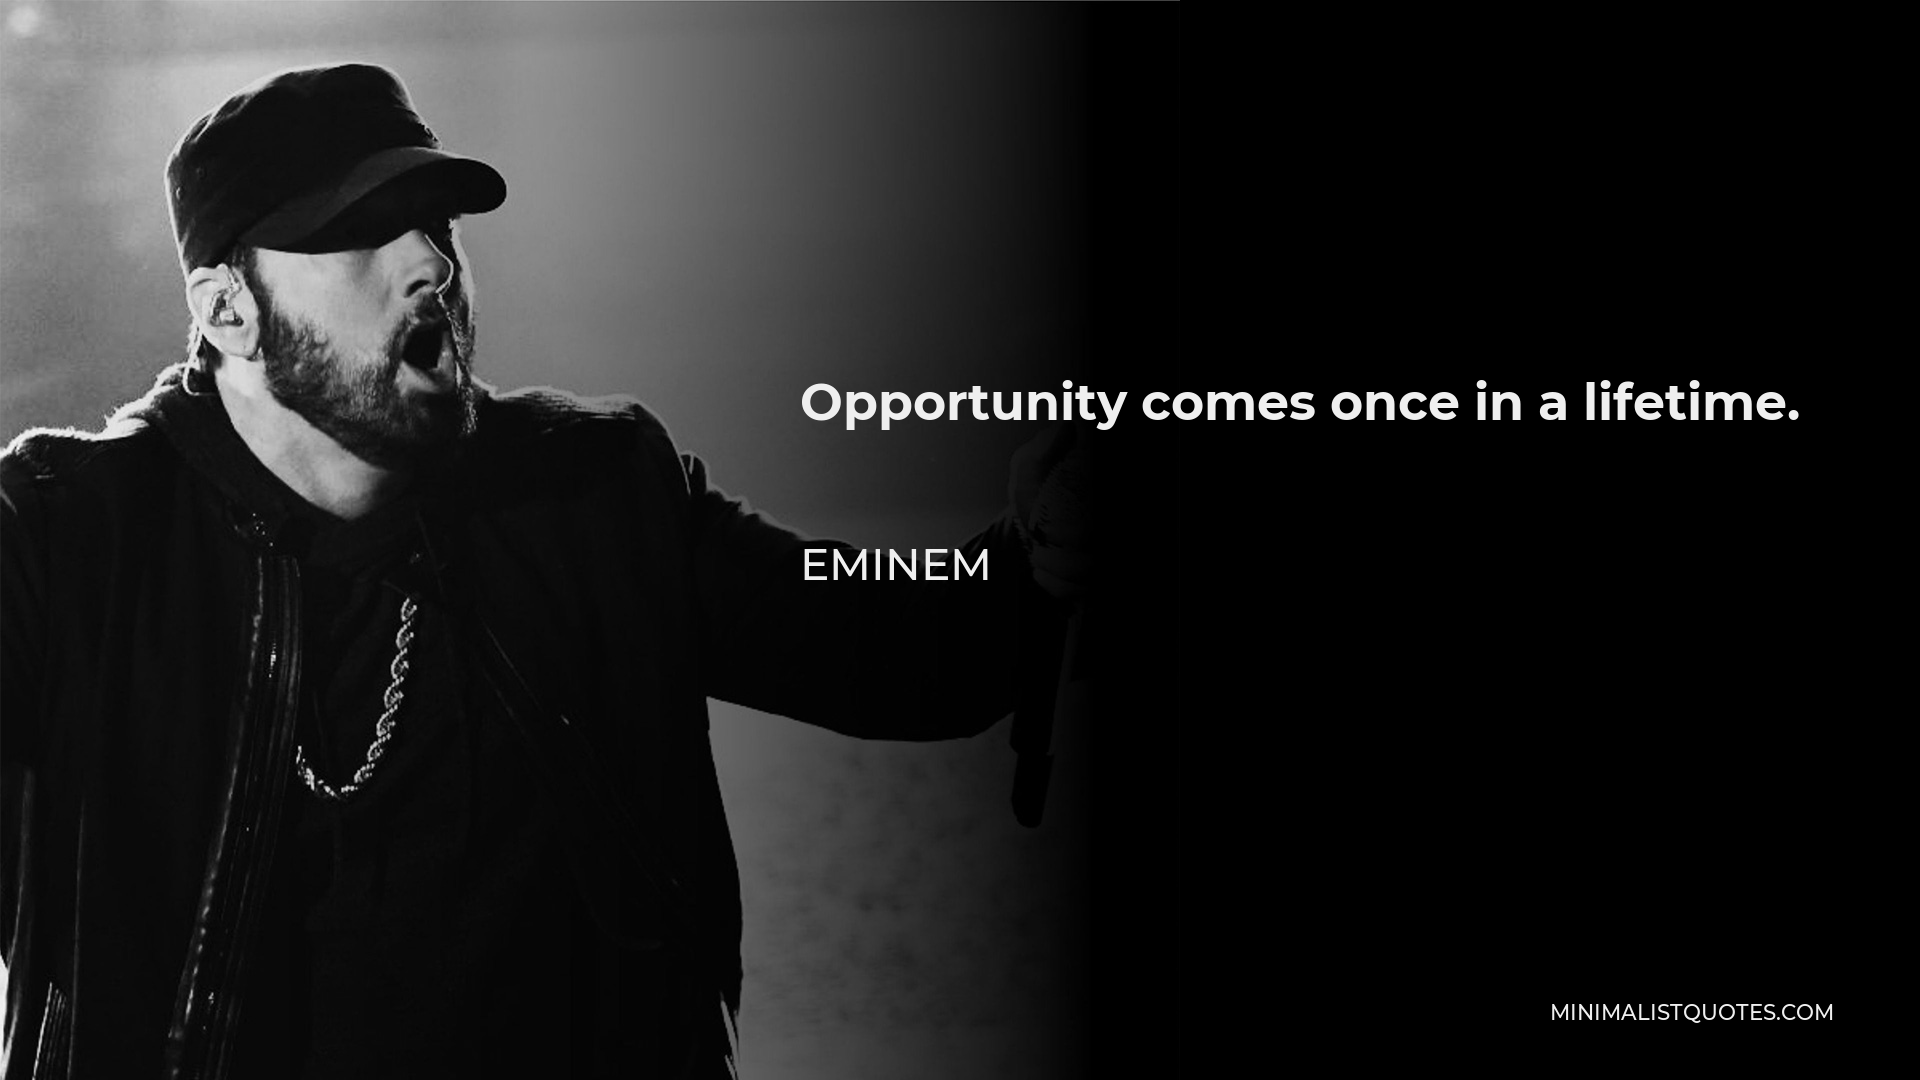 Eminem Quote - Opportunity comes once in a lifetime.